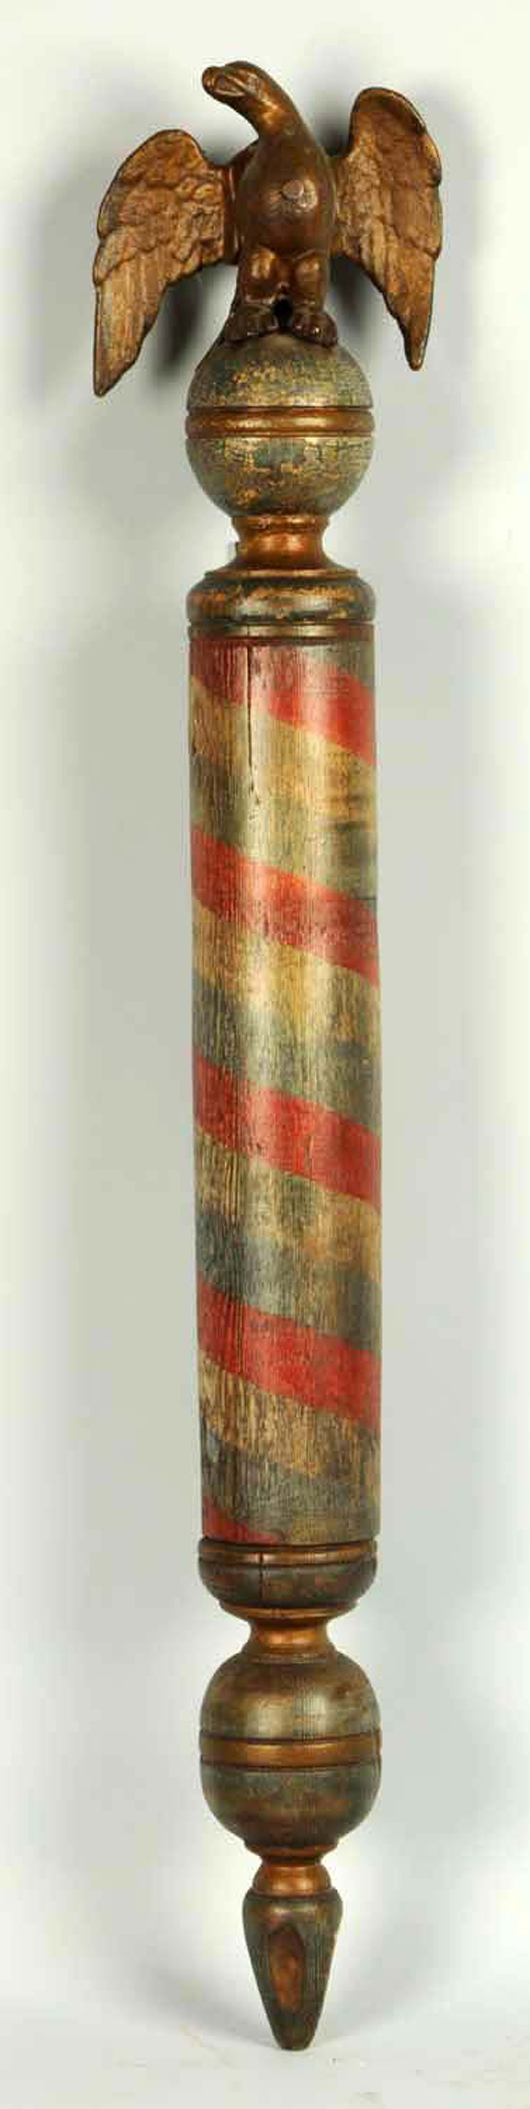 Early 44-inch red and gold striped pole with a three dimensional eagle on finial, $5,700. Morphy Auctions image.